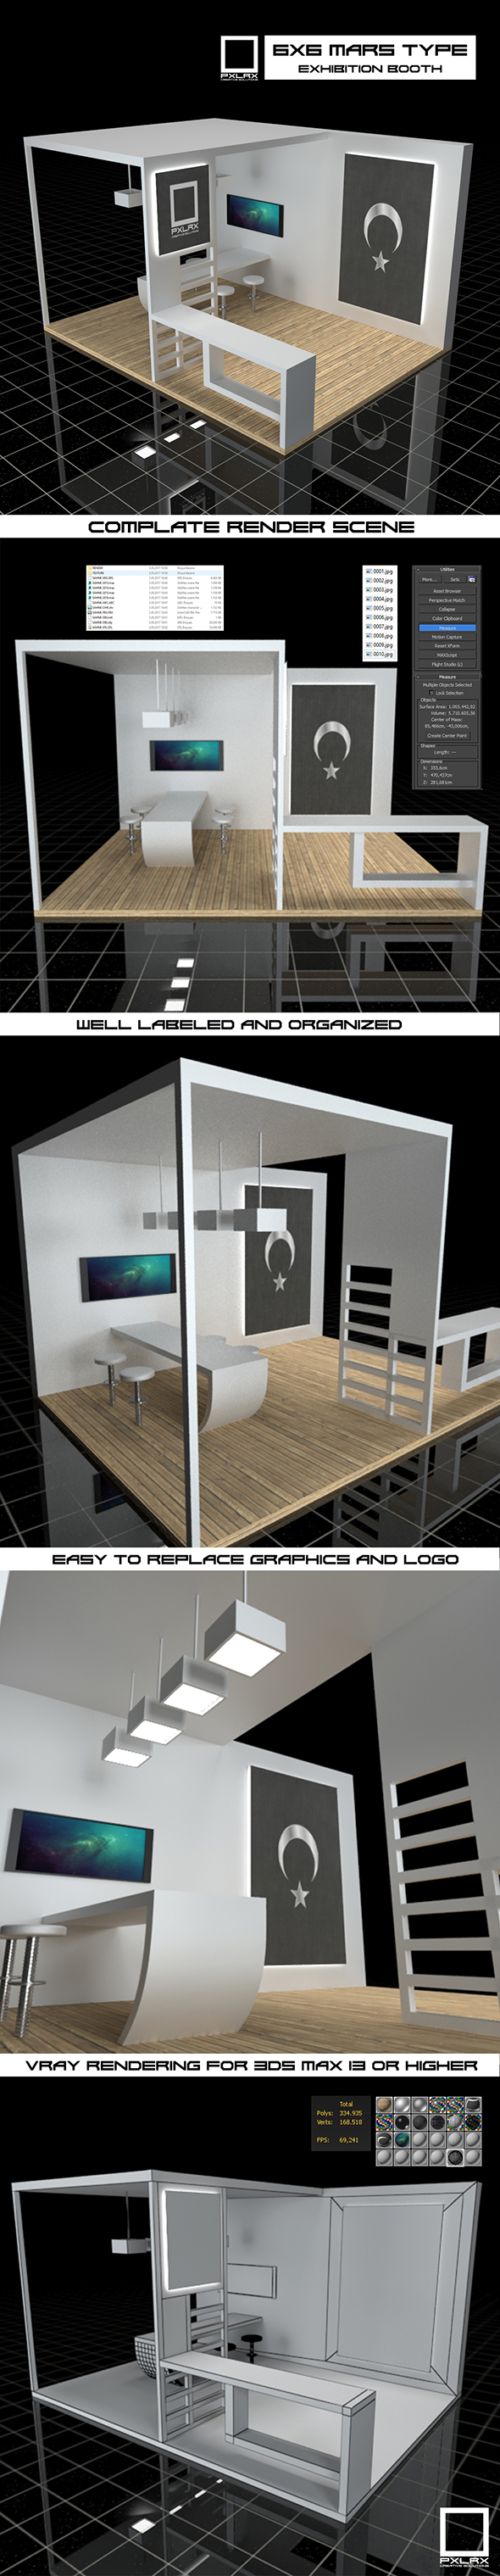 Exhibition Booth Vray Scene
           3D Model